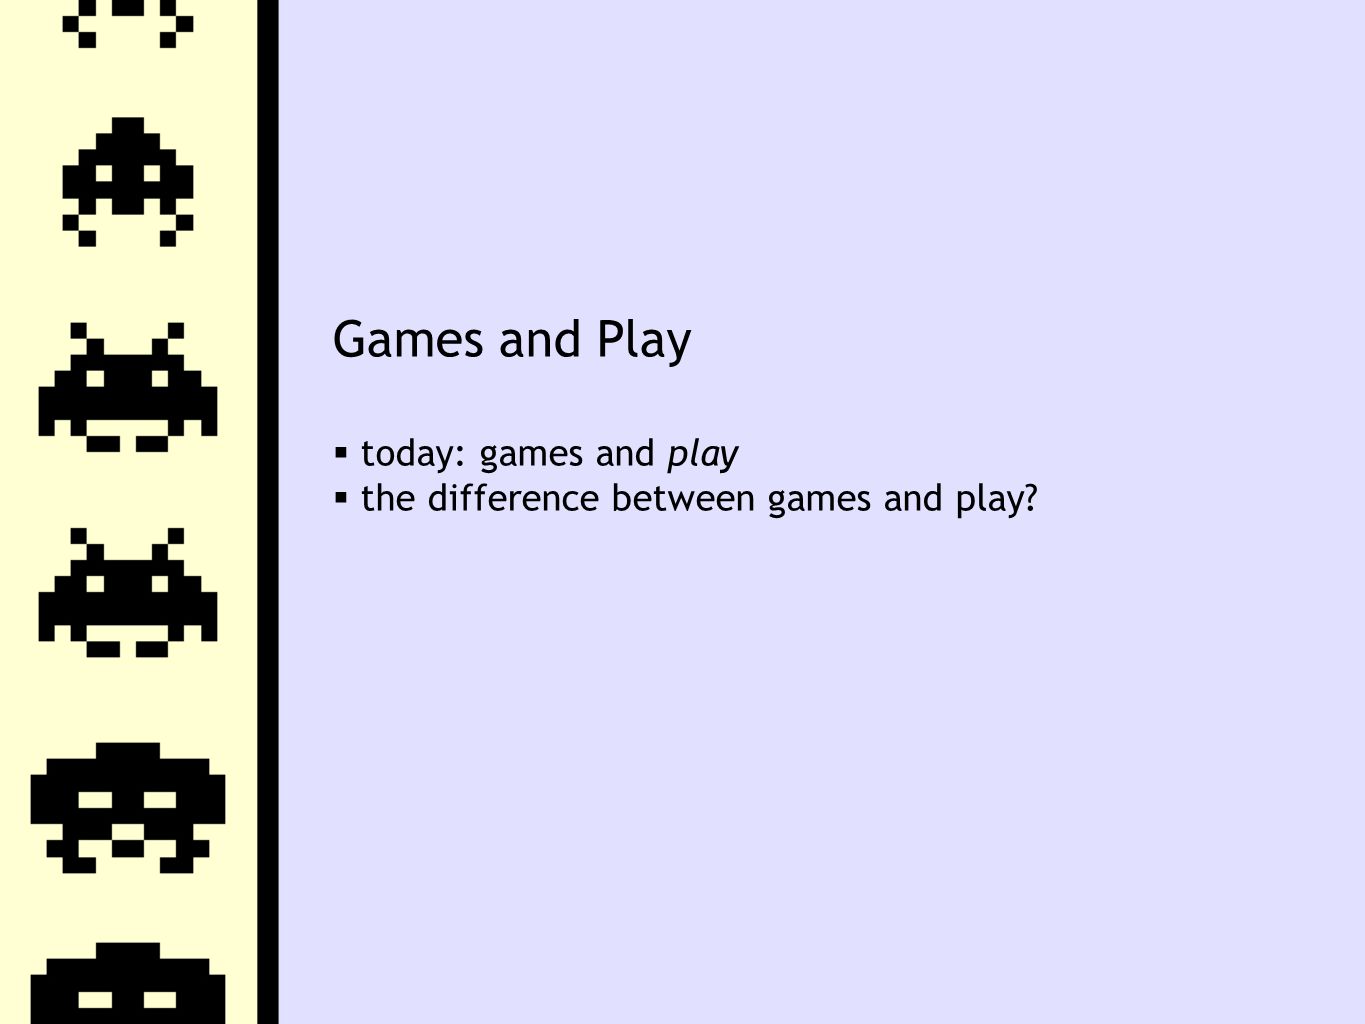 04 Homo ludens. Games and Play  today: games and play  the difference  between games and play? - ppt download